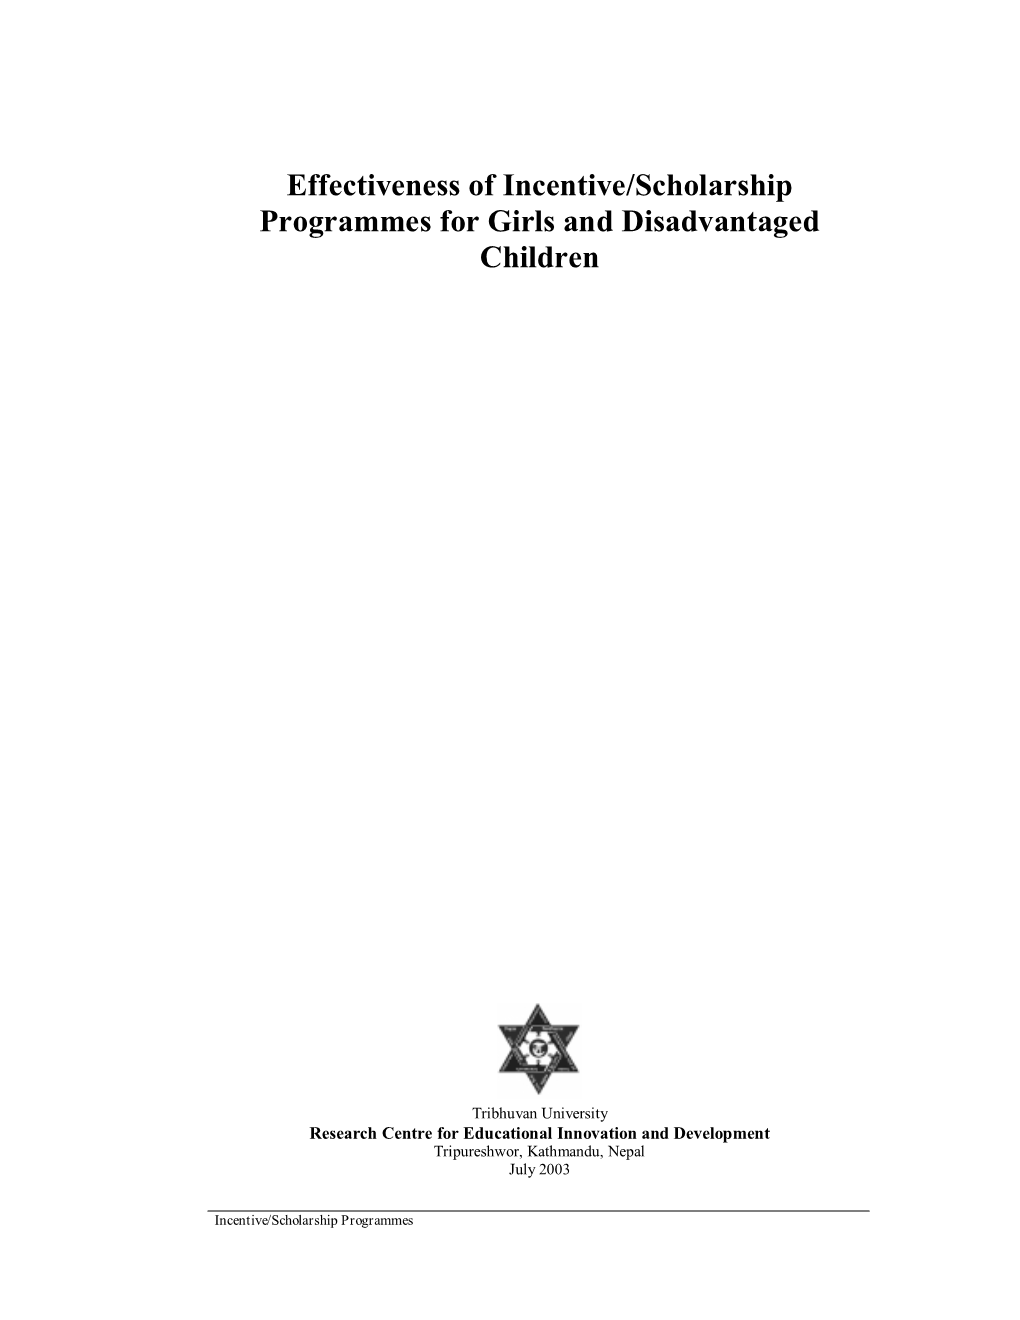 Effectiveness of Incentive/Scholarship Programmes for Girls and Disadvantaged Children